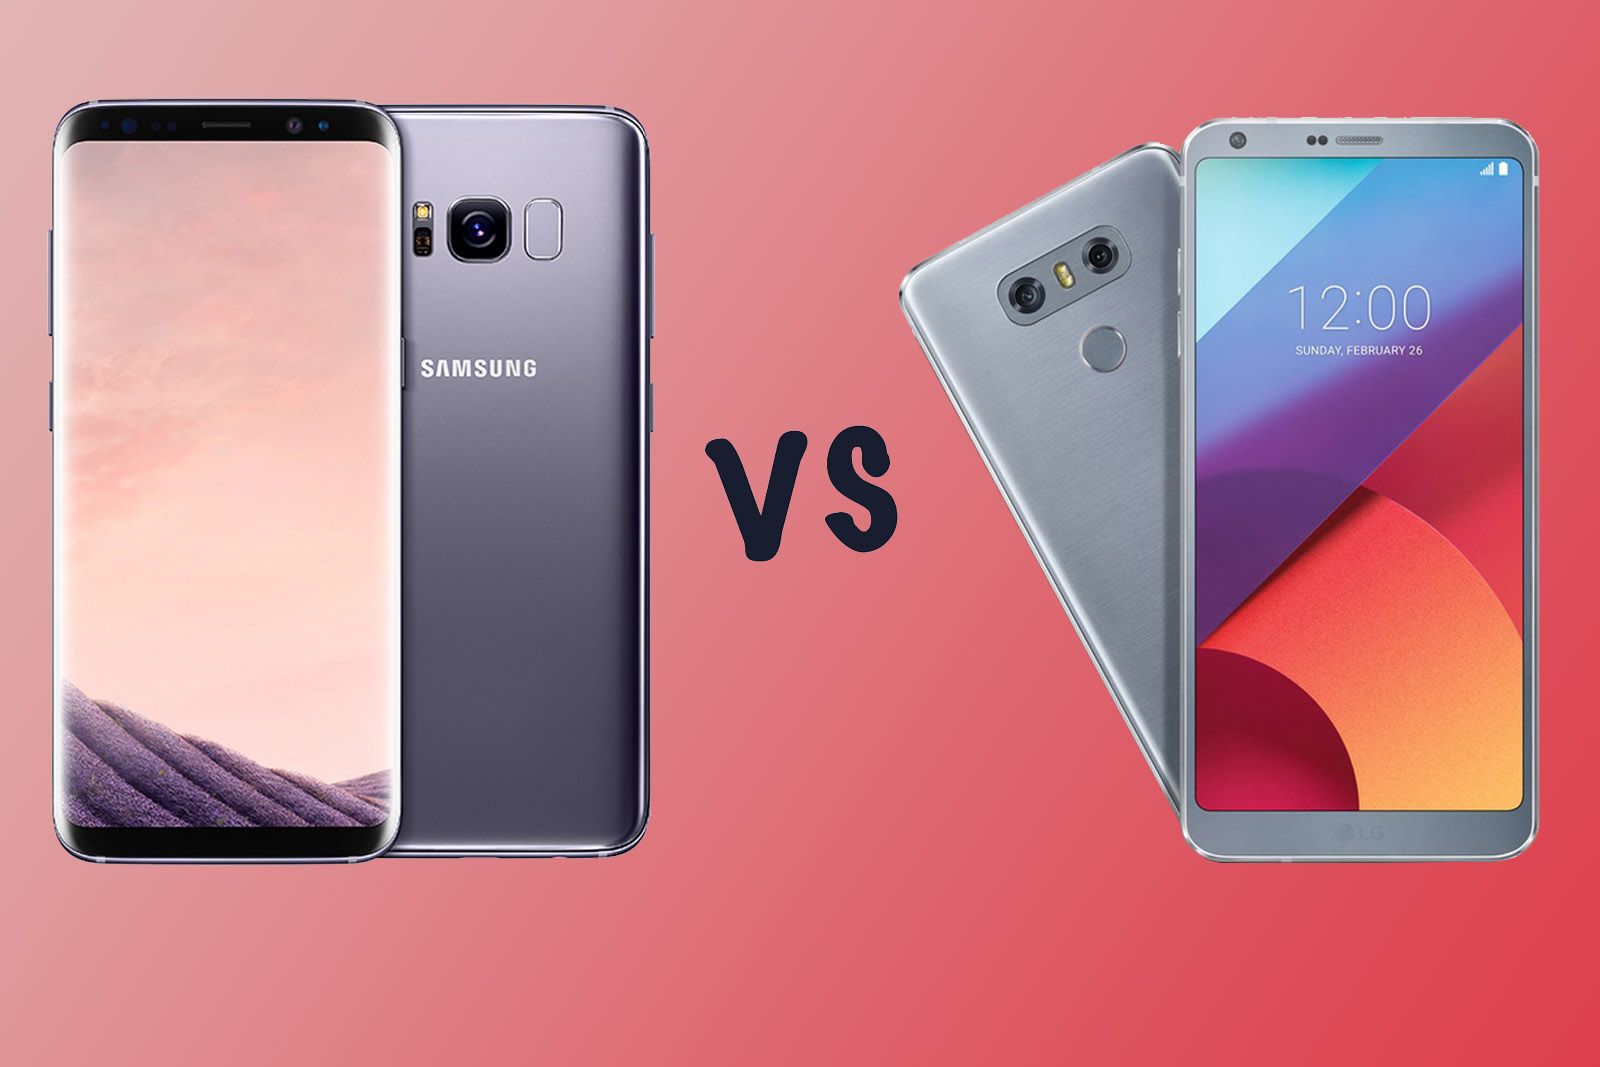 samsung galaxy s8 vs s8 plus vs lg g6 what s the difference image 1